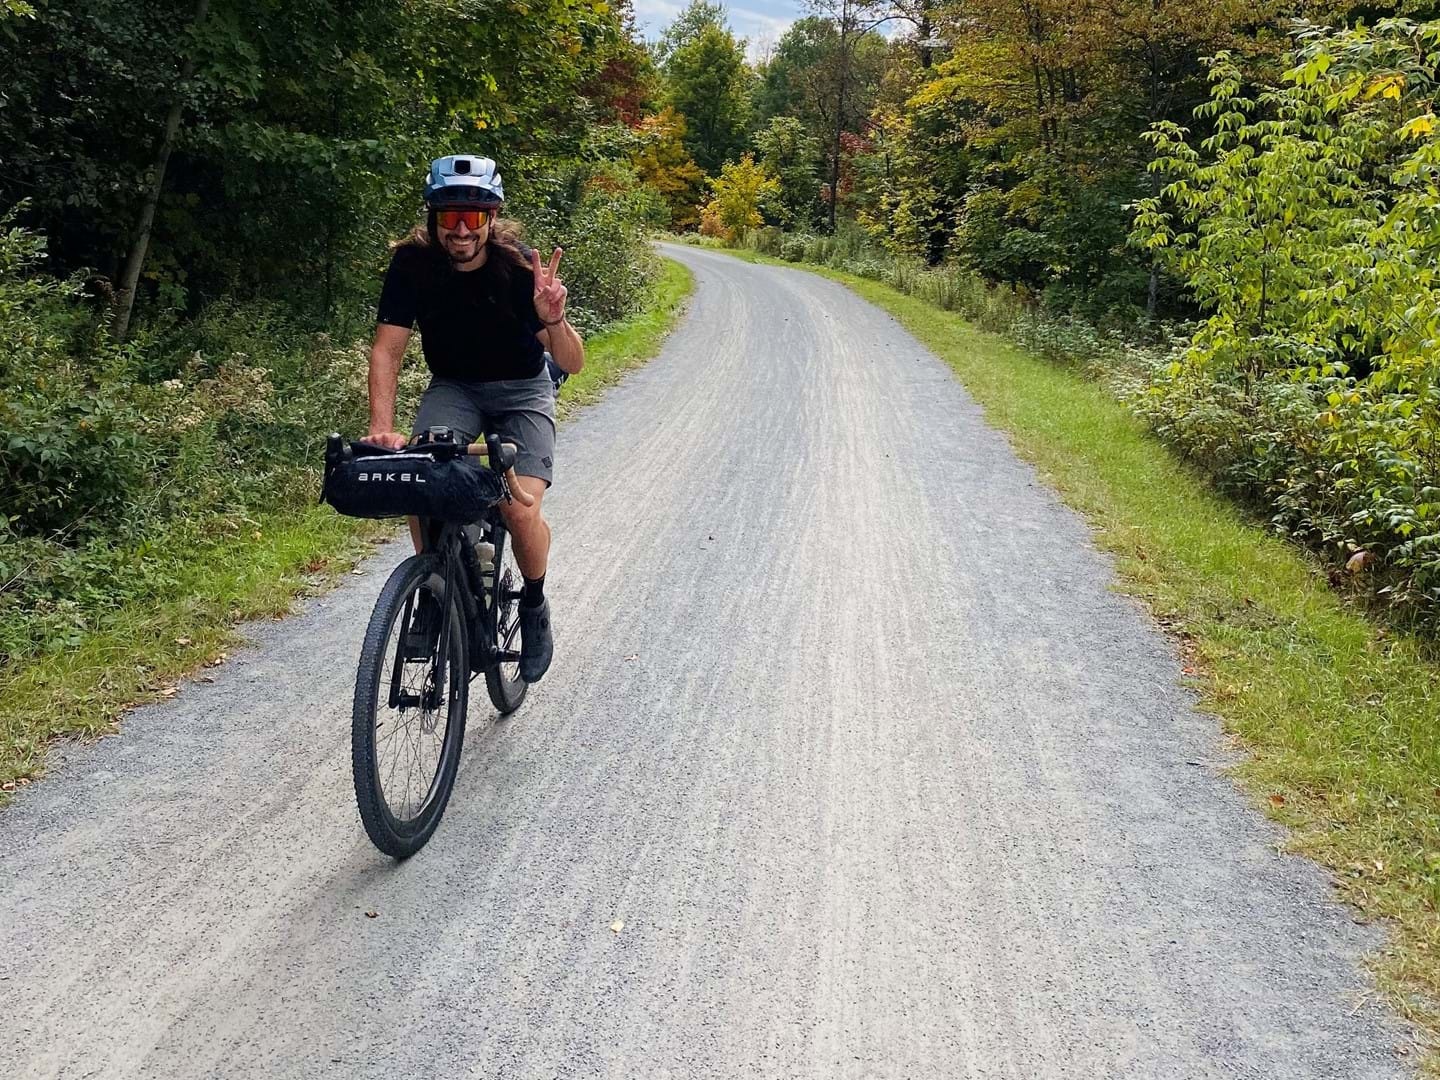 Bikepacking: how to get started?